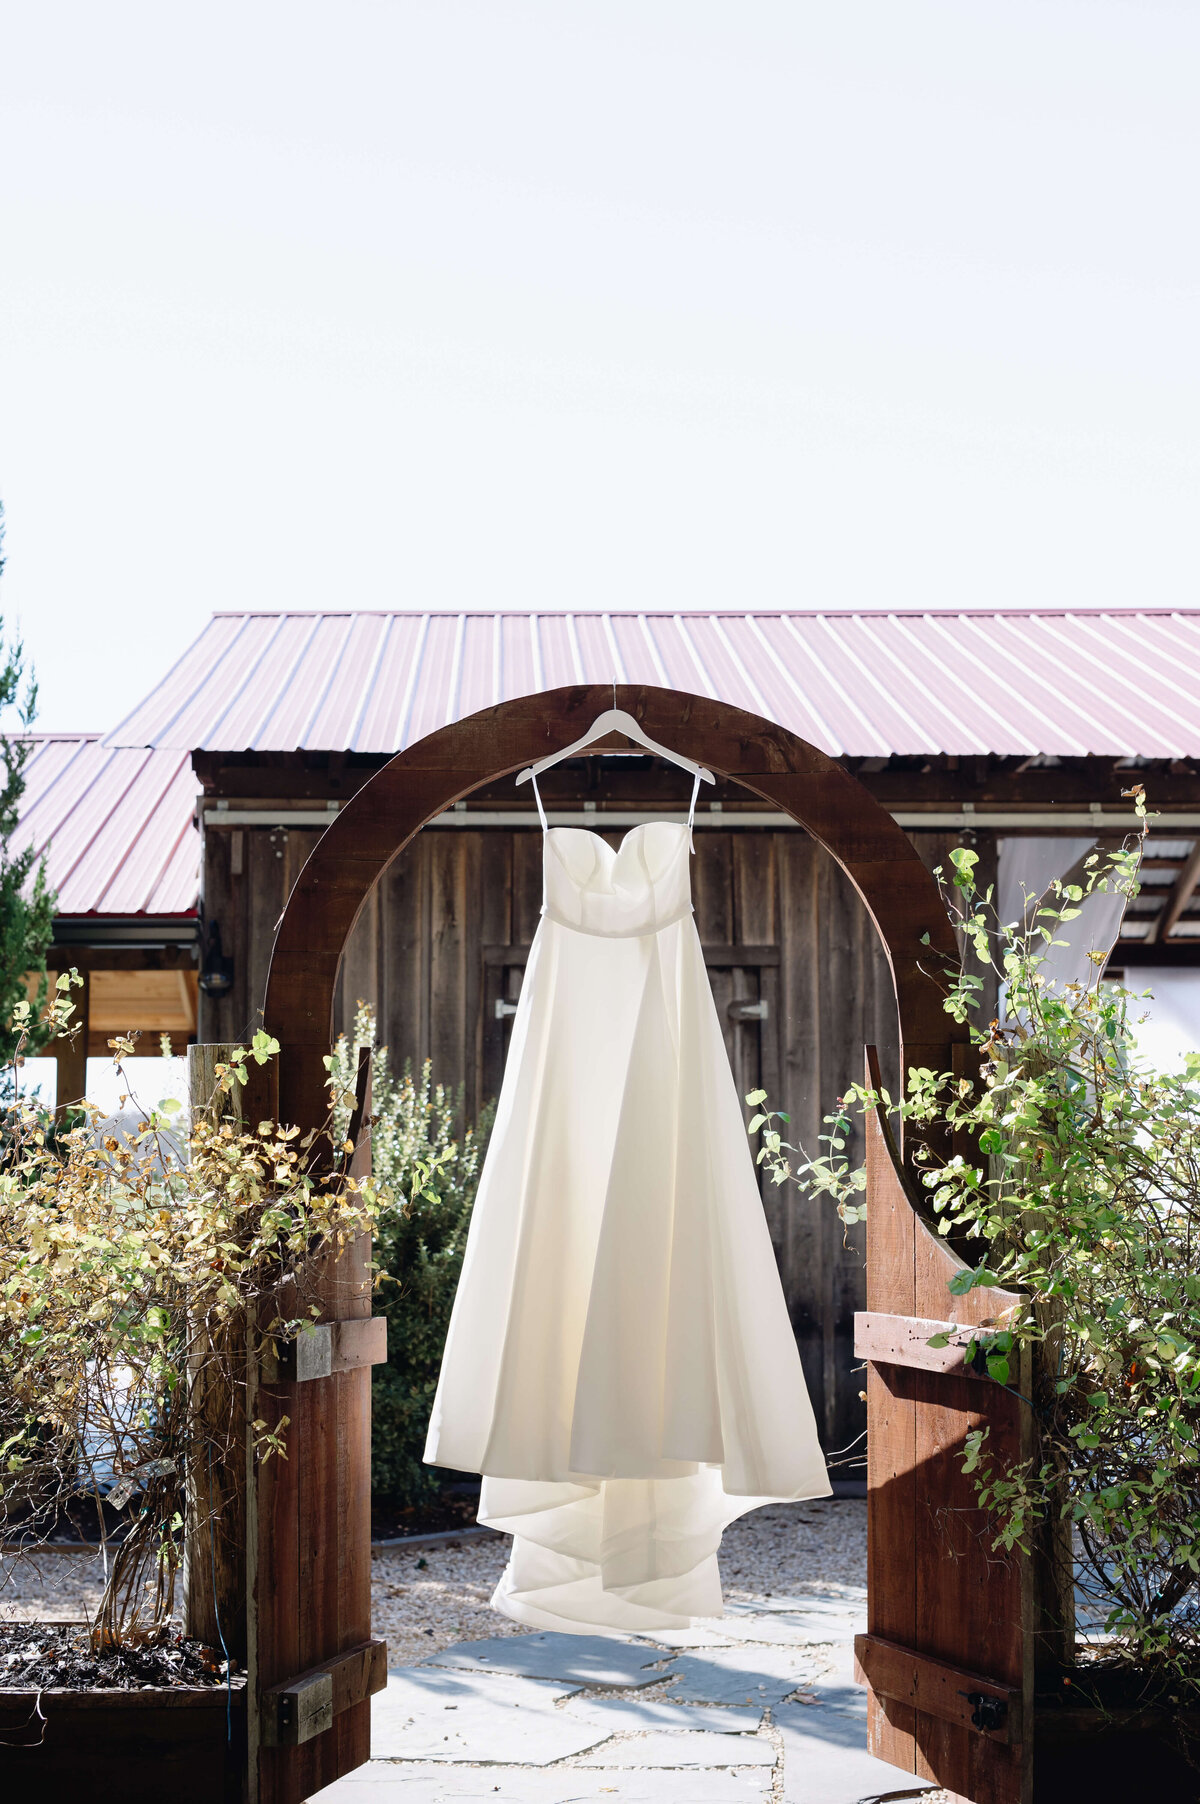 satin wedding dress hanging in a garden on a walkway arch with a cute shed behind it